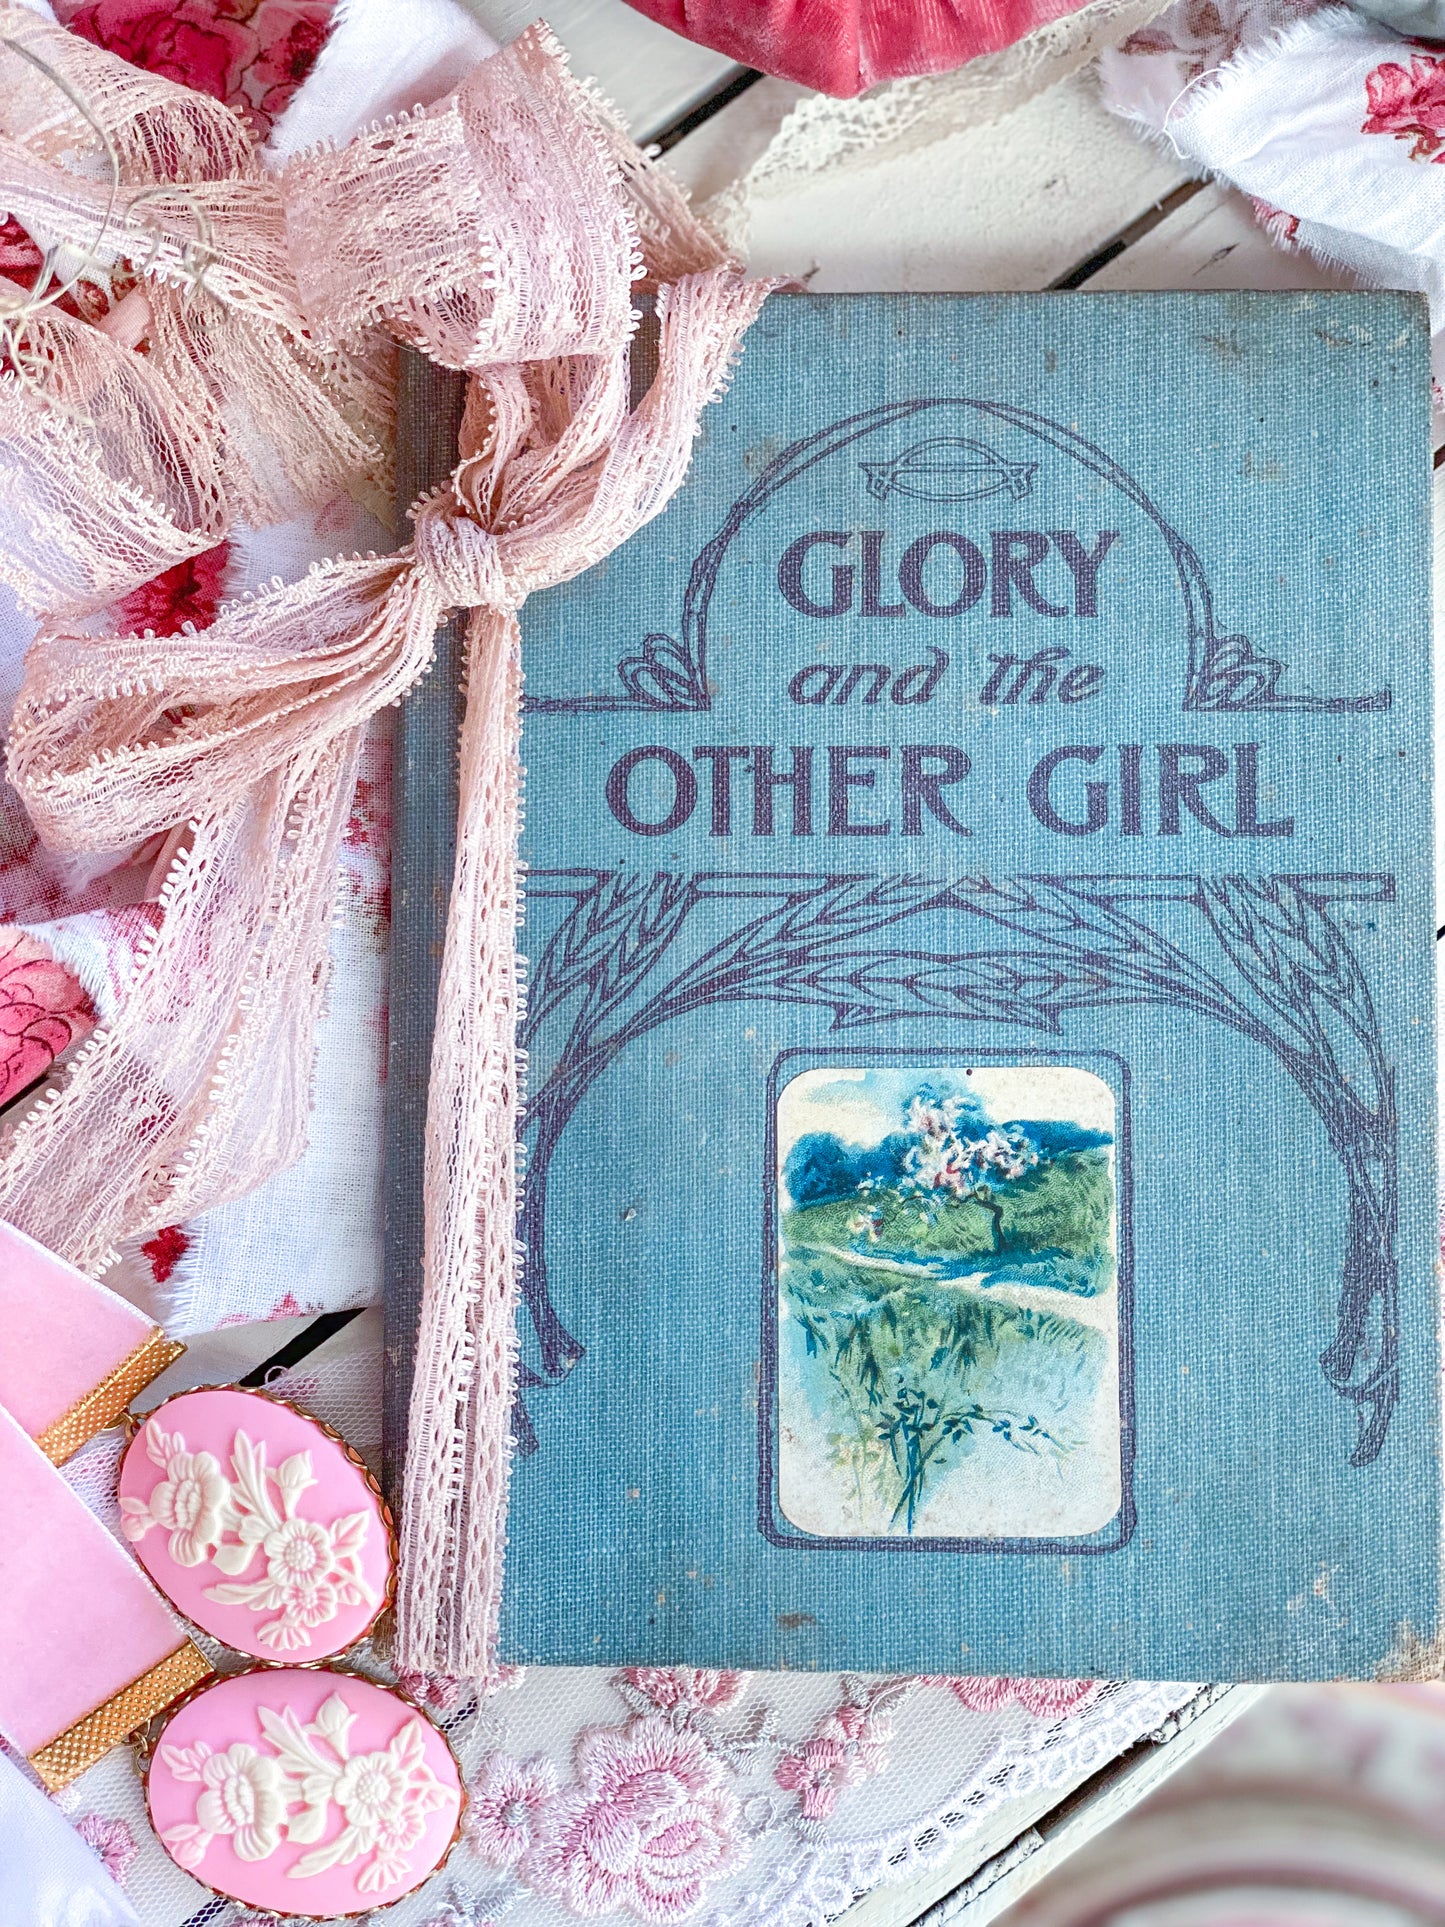 Glory and the Other Girl with blue floral cover